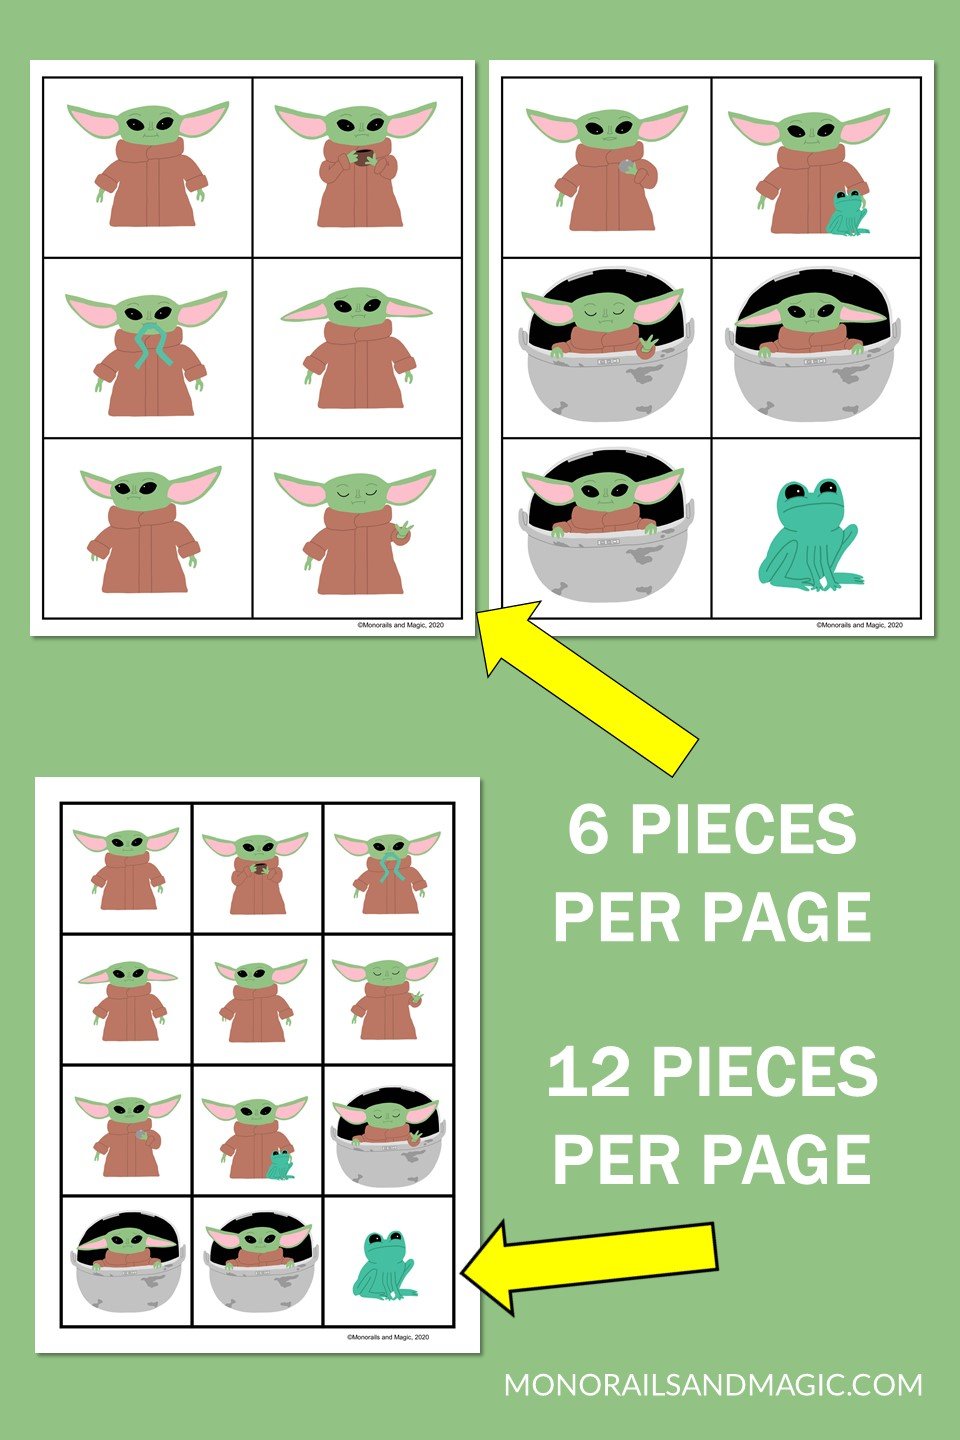 Free printable Baby Yoda memory game for kids pieces.